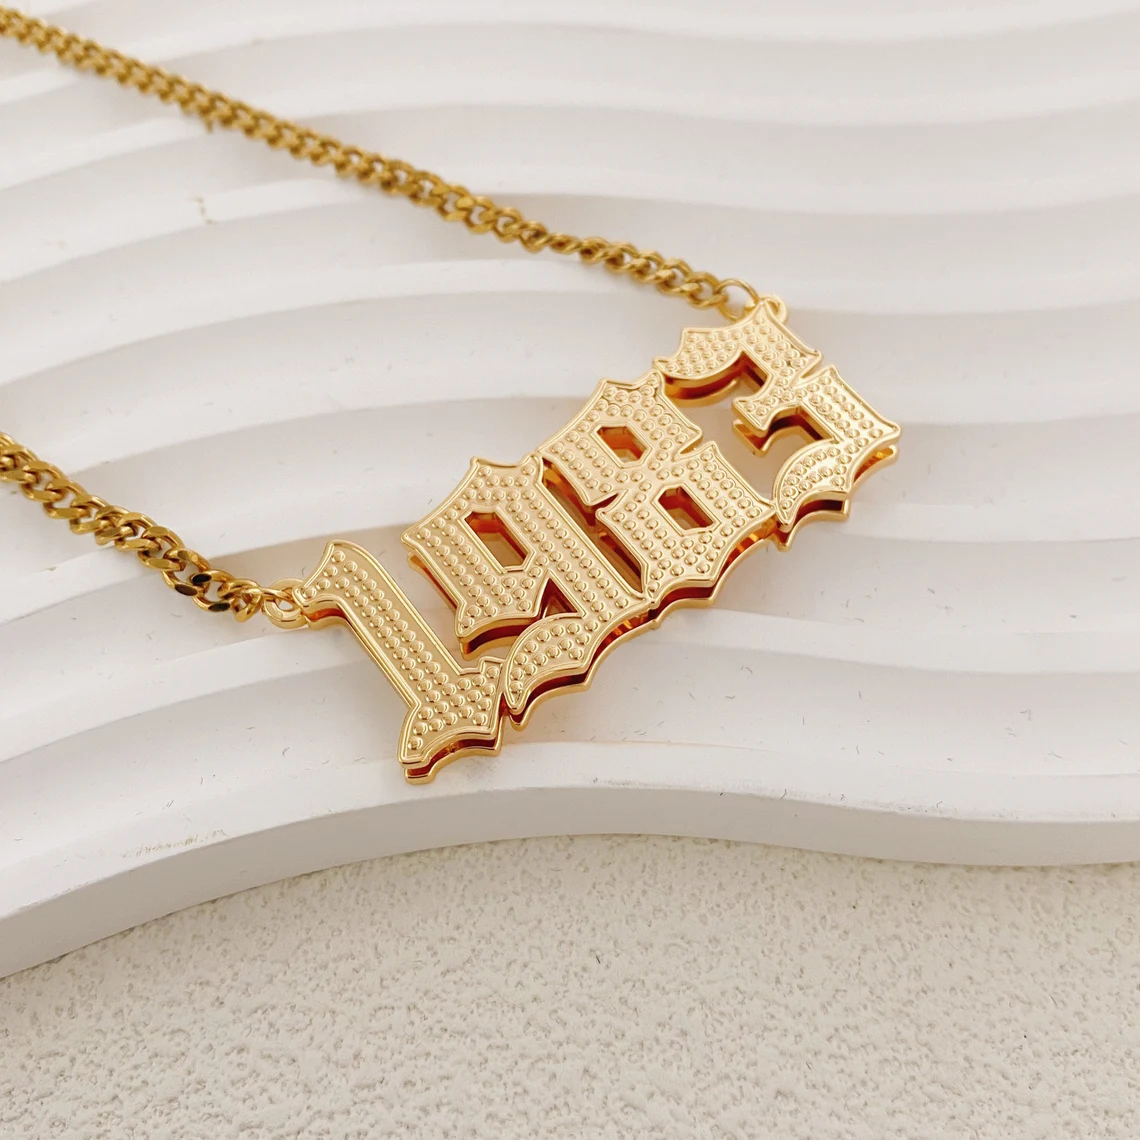 Birth Year Necklace Gold Plated Personalized Number Necklace